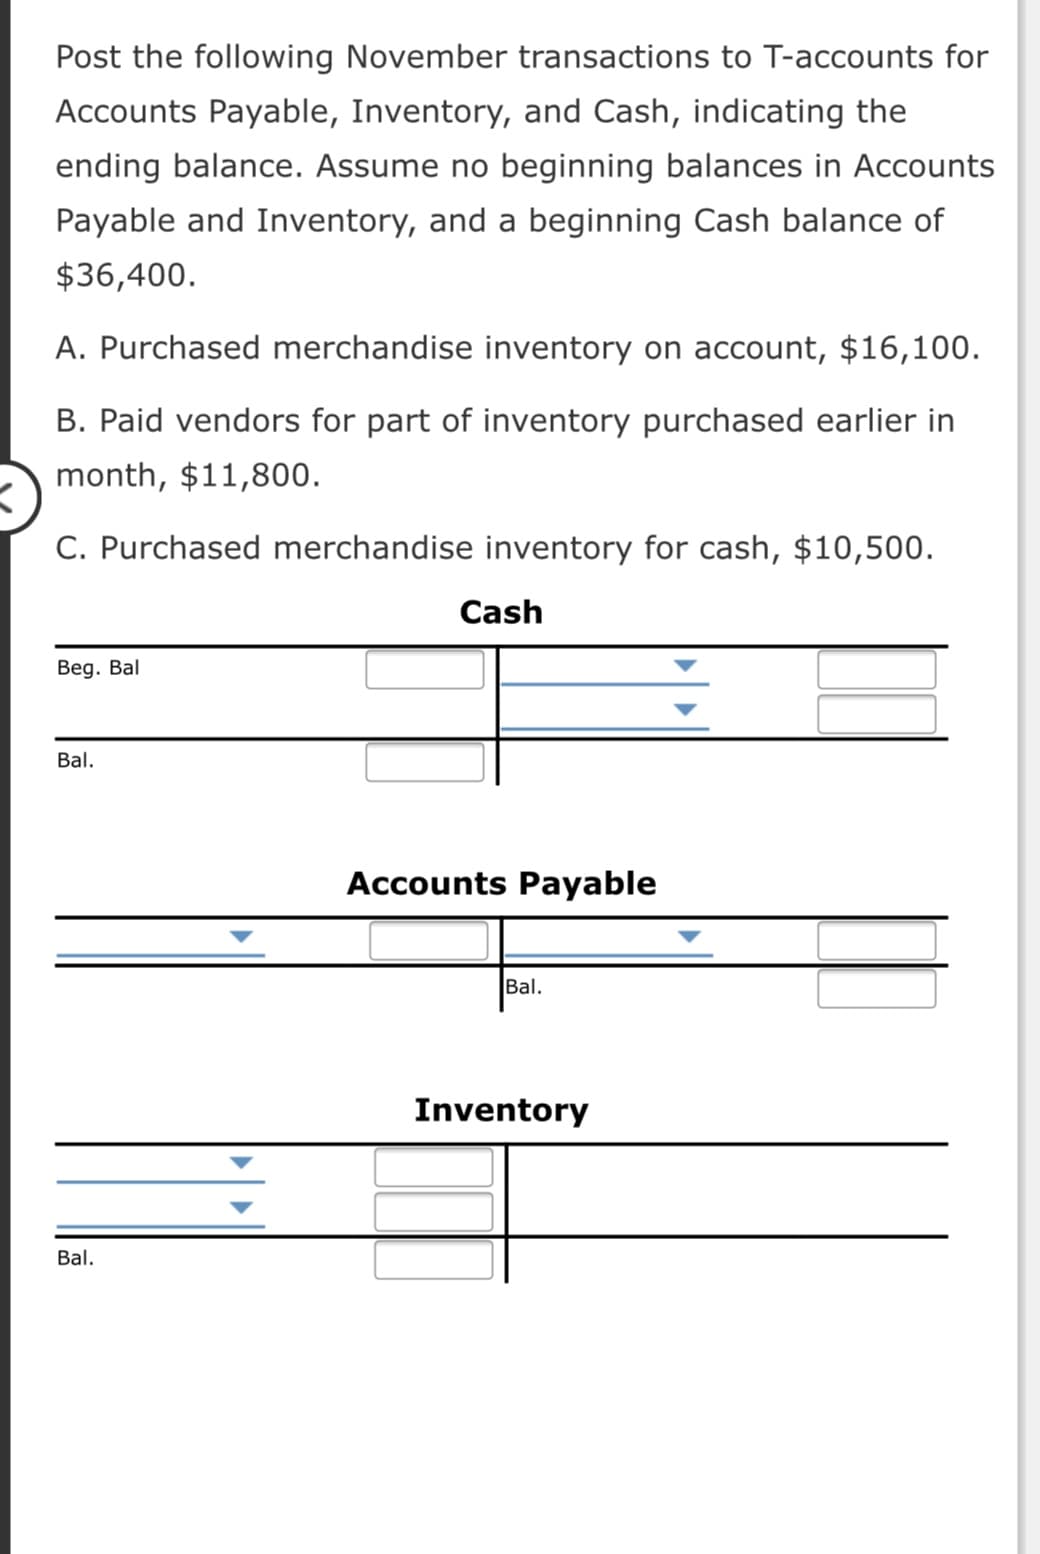 Post the following November transactions to T-accounts for
Accounts Payable, Inventory, and Cash, indicating the
ending balance. Assume no beginning balances in Accounts
Payable and Inventory, and a beginning Cash balance of
$36,400.
A. Purchased merchandise inventory on account, $16,100.
B. Paid vendors for part of inventory purchased earlier in
month, $11,800.
C. Purchased merchandise inventory for cash, $10,500.
Cash
Beg. Bal
Bal.
Accounts Payable
Bal.
Inventory
Bal.
